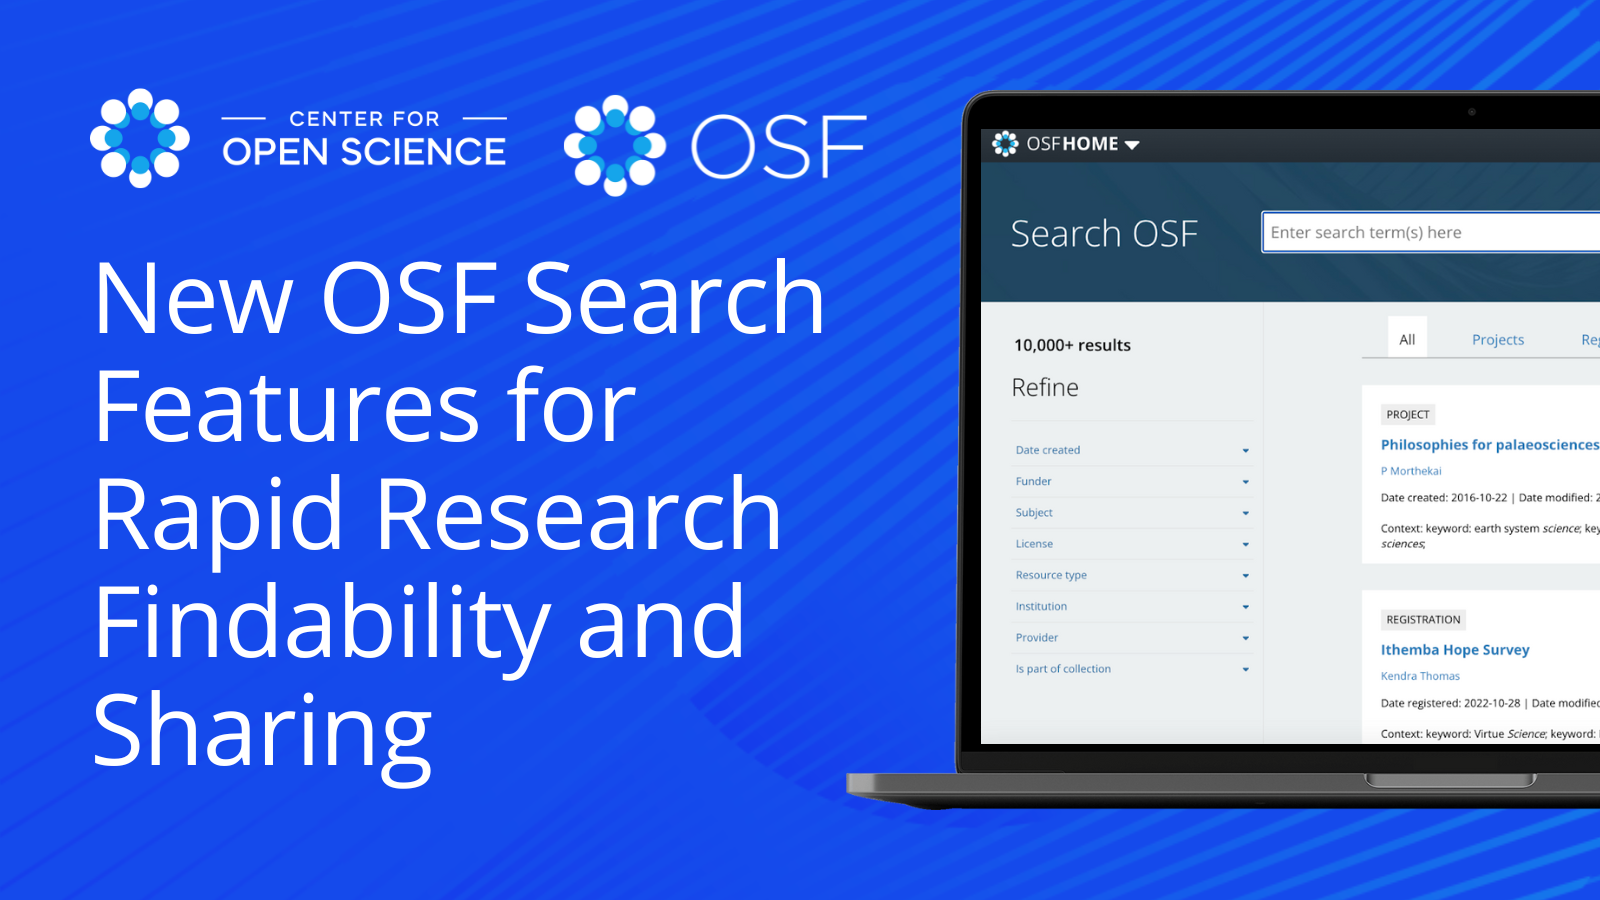 New OSF Search Features for Rapid Research Findability and Sharing